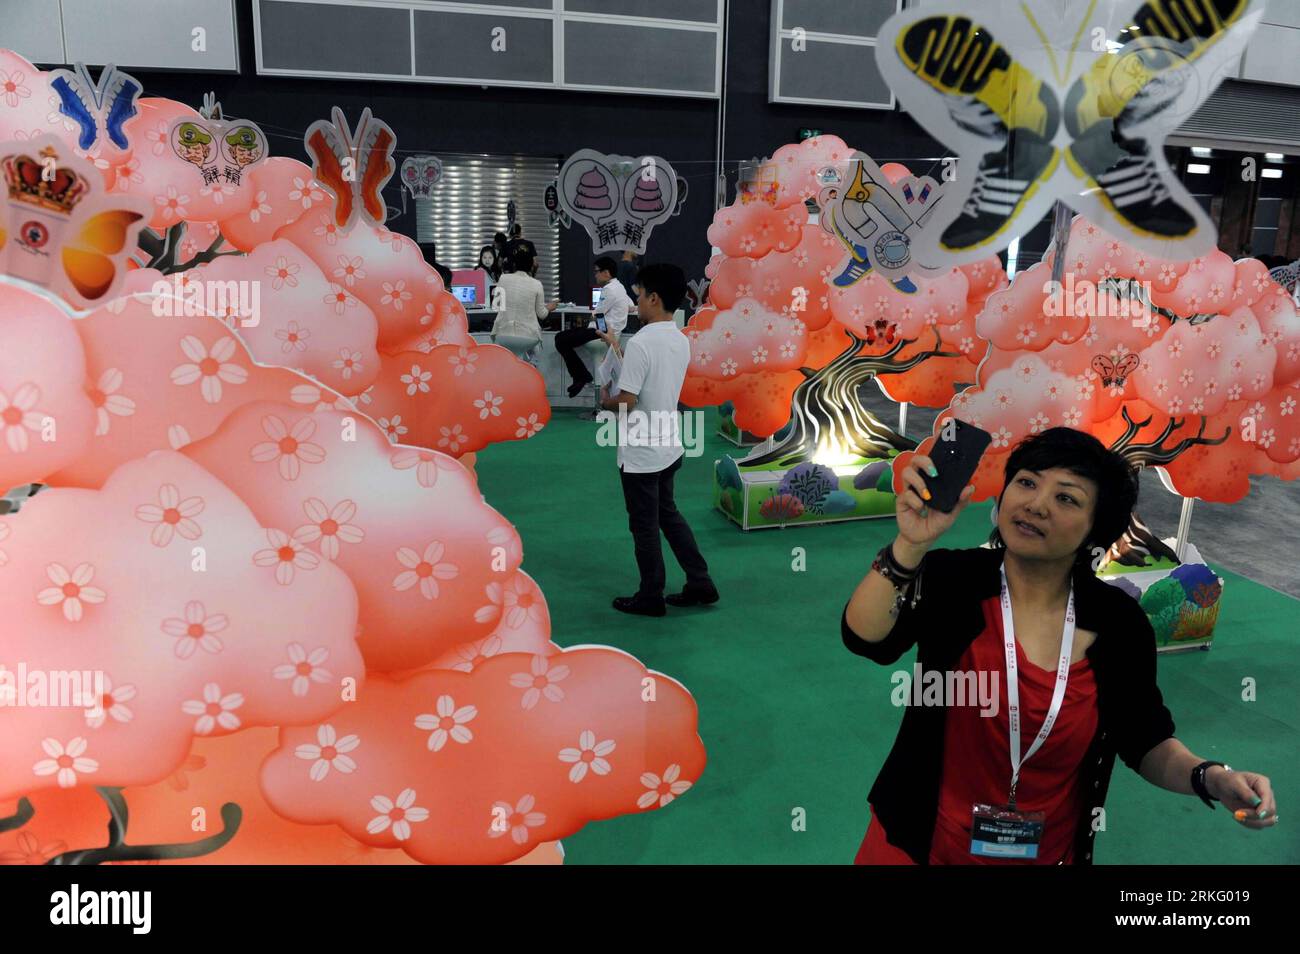 Bildnummer: 55501280  Datum: 19.06.2011  Copyright: imago/Xinhua (110619) -- HONG KONG, June 19, 2011 (Xinhua) -- A visitor takes photo of the flying butterflies at an iButterfly apps booth at the APPS@SMARTPHONE ASIA EXPO 2011 in Hong Kong, south China, June 19, 2011. The exposition was held in Hong Kong Convention and Exhibition Center from June 17 to 19. (Xinhua/Song Zhenping) (llp) CHINA-HONG KONG-APPS SMARTPHONE EXPO (CN) PUBLICATIONxNOTxINxCHN Wirtschaft Messen Messe Technik xdp x0x premiumd 2011 quer     Bildnummer 55501280 Date 19 06 2011 Copyright Imago XINHUA  Hong Kong June 19 2011 Stock Photo